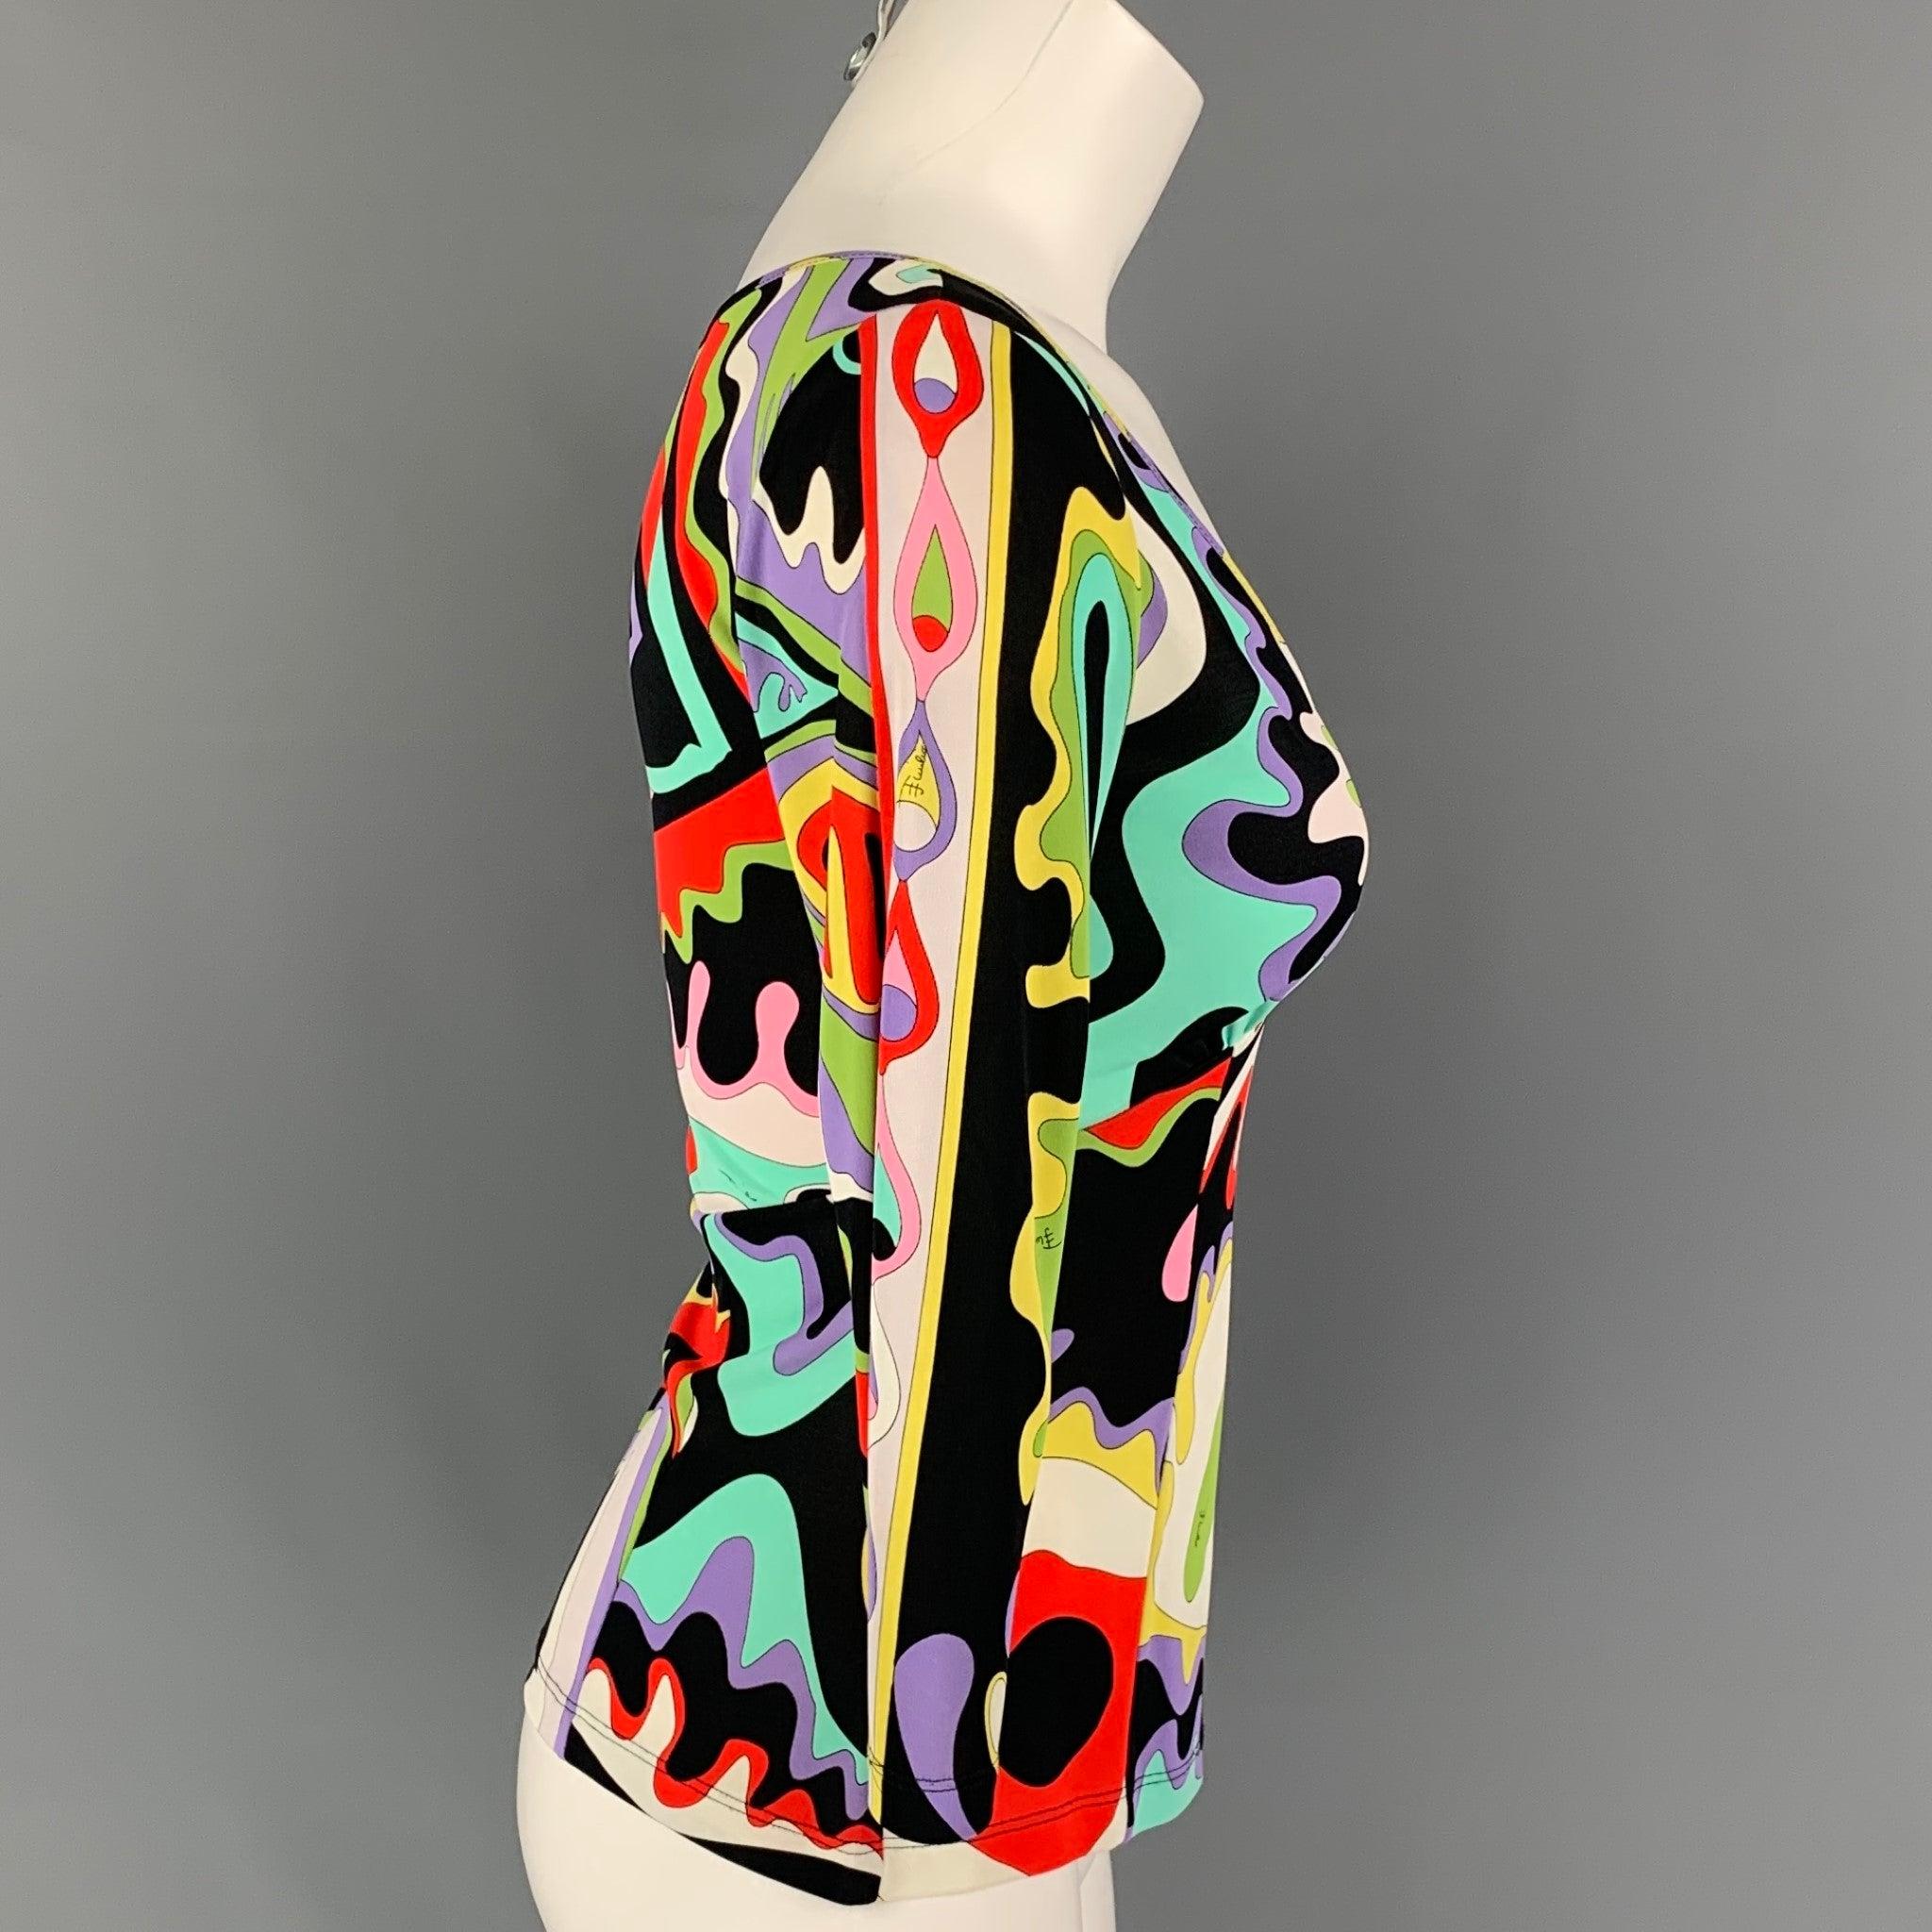 EMILIO PUCCI blouse comes in a multi-color abstract rayon featuring a v-neck. Made in Italy.
Very Good
Pre-Owned Condition. 

Marked:   I 40 / F 36 / USA 6 / UK 8  

Measurements: 
 
Shoulder: 15.5 inches  Bust: 32 inches  Sleeve: 18 inches  Length: